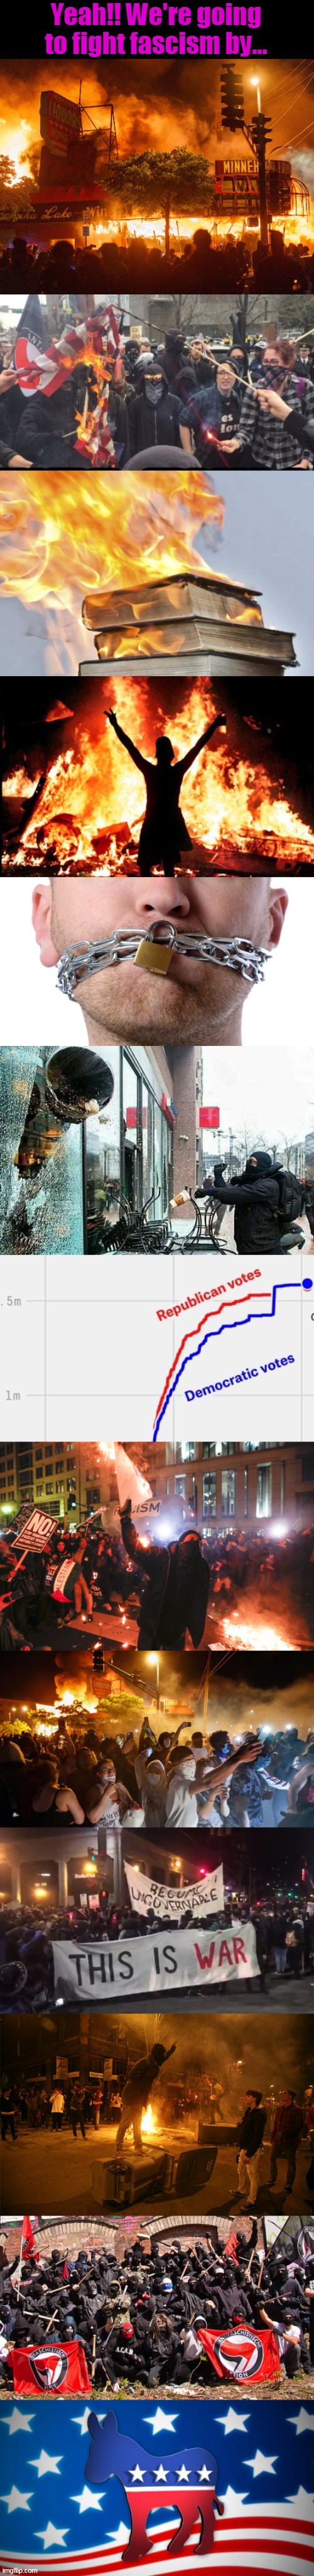 Congratulations, you progressive morally superior lefty elites. Thanks for protecting America from the evils of fascism!! | Yeah!! We're going to fight fascism by... | image tagged in democrat policies,antifa democrat leftist terrorist,burning books,censorship,overnight election fraud,berkeley riots | made w/ Imgflip meme maker